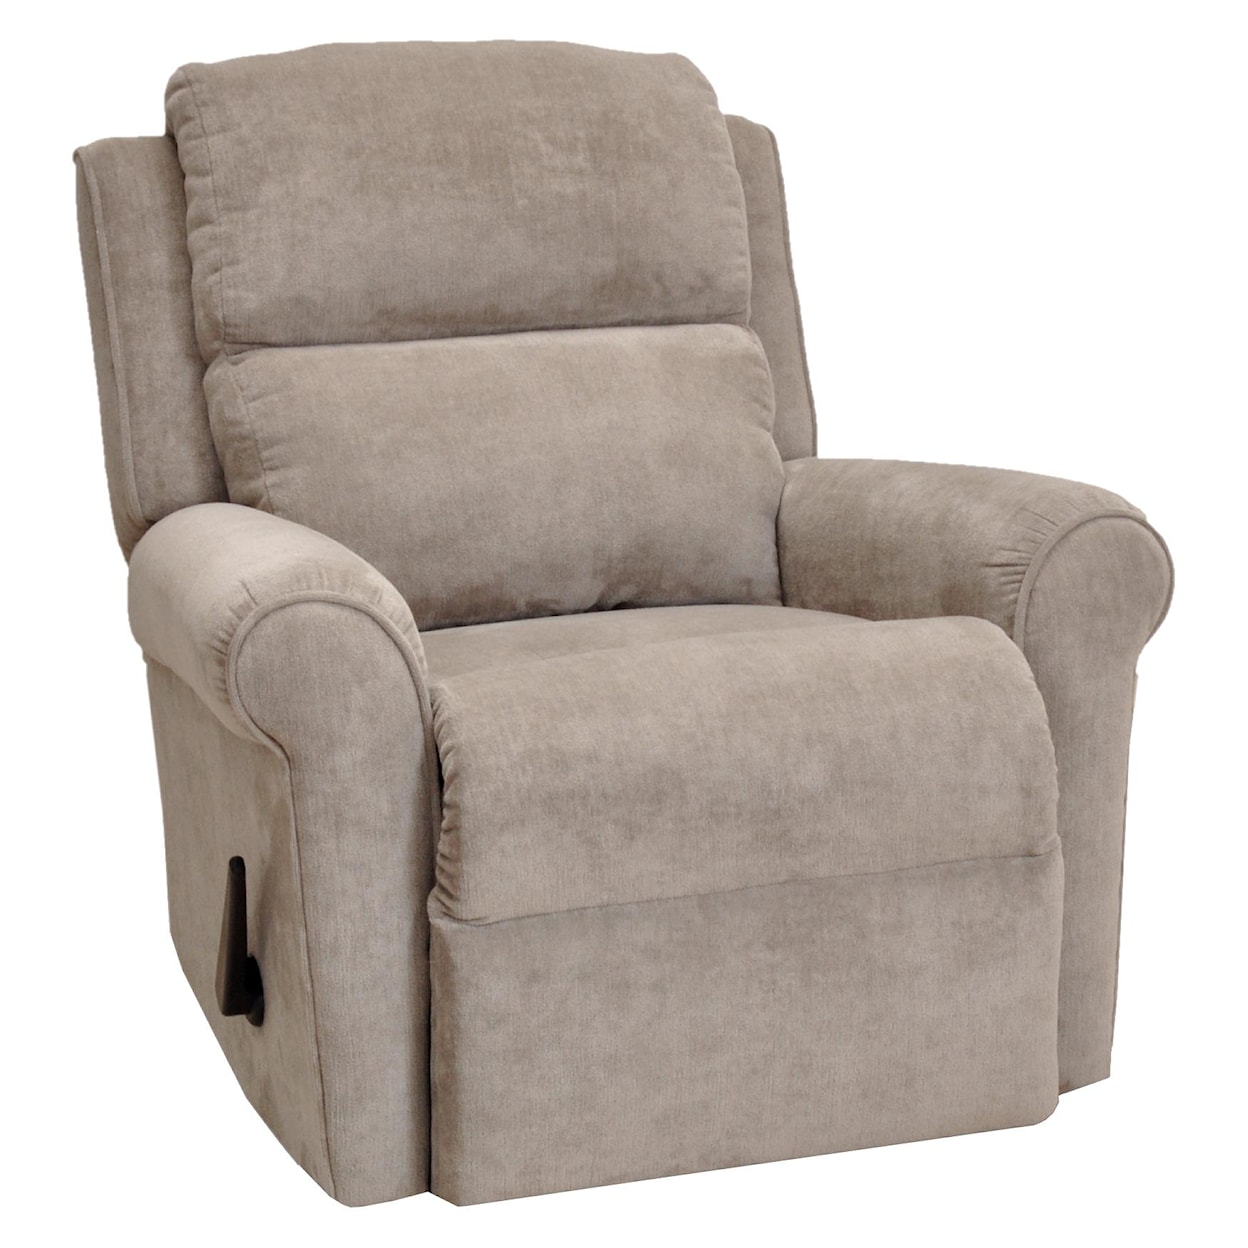 Franklin Franklin Recliners Serenity Rocker Recliner with Casual Style